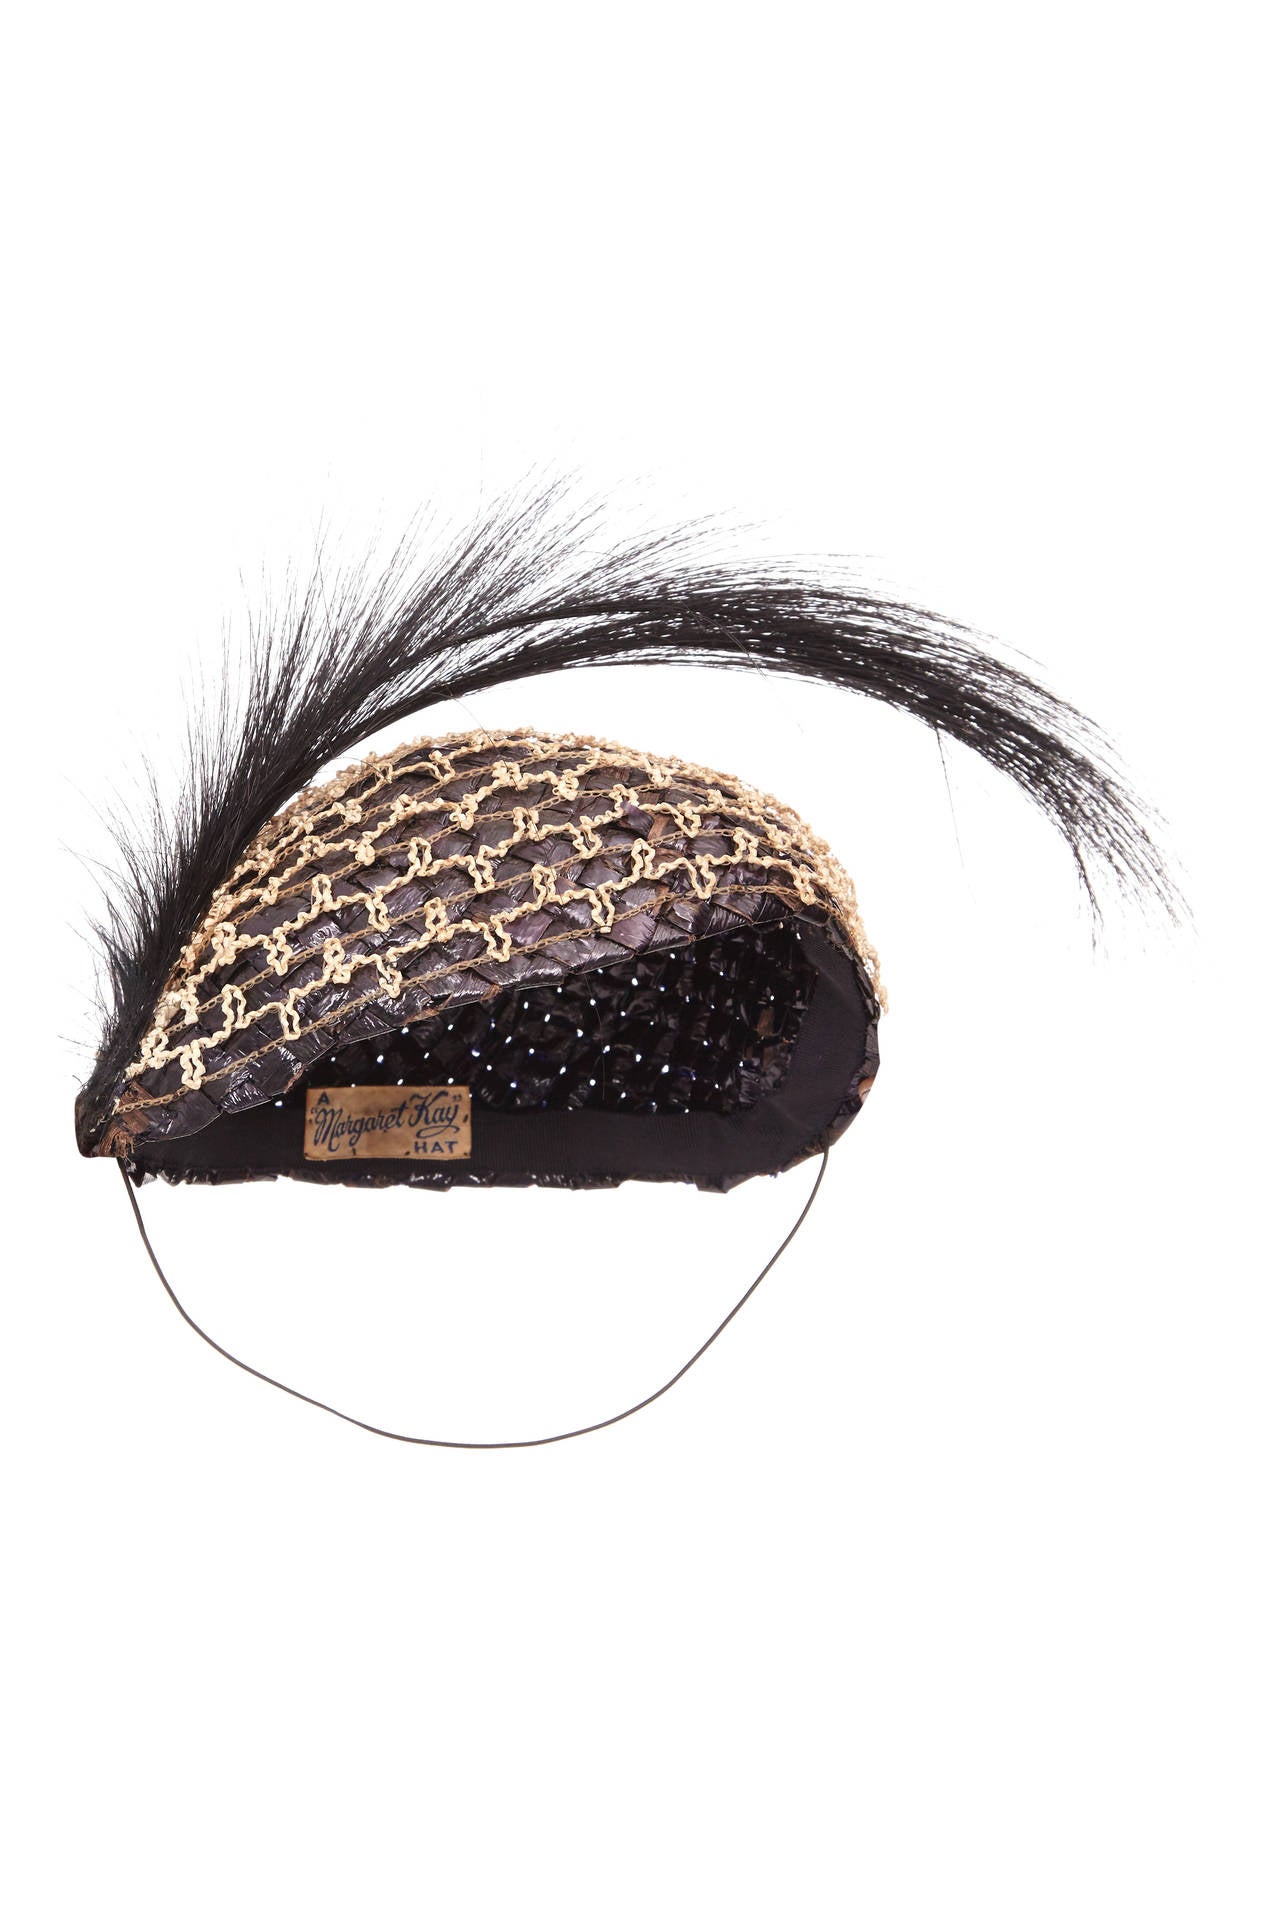 Very rare, original 1920s flapper hat made from coated black woven raffia. Additional antique two-tone cream lattice overlay to one half of the hat, topped with a black hair spray.  Original label reads 